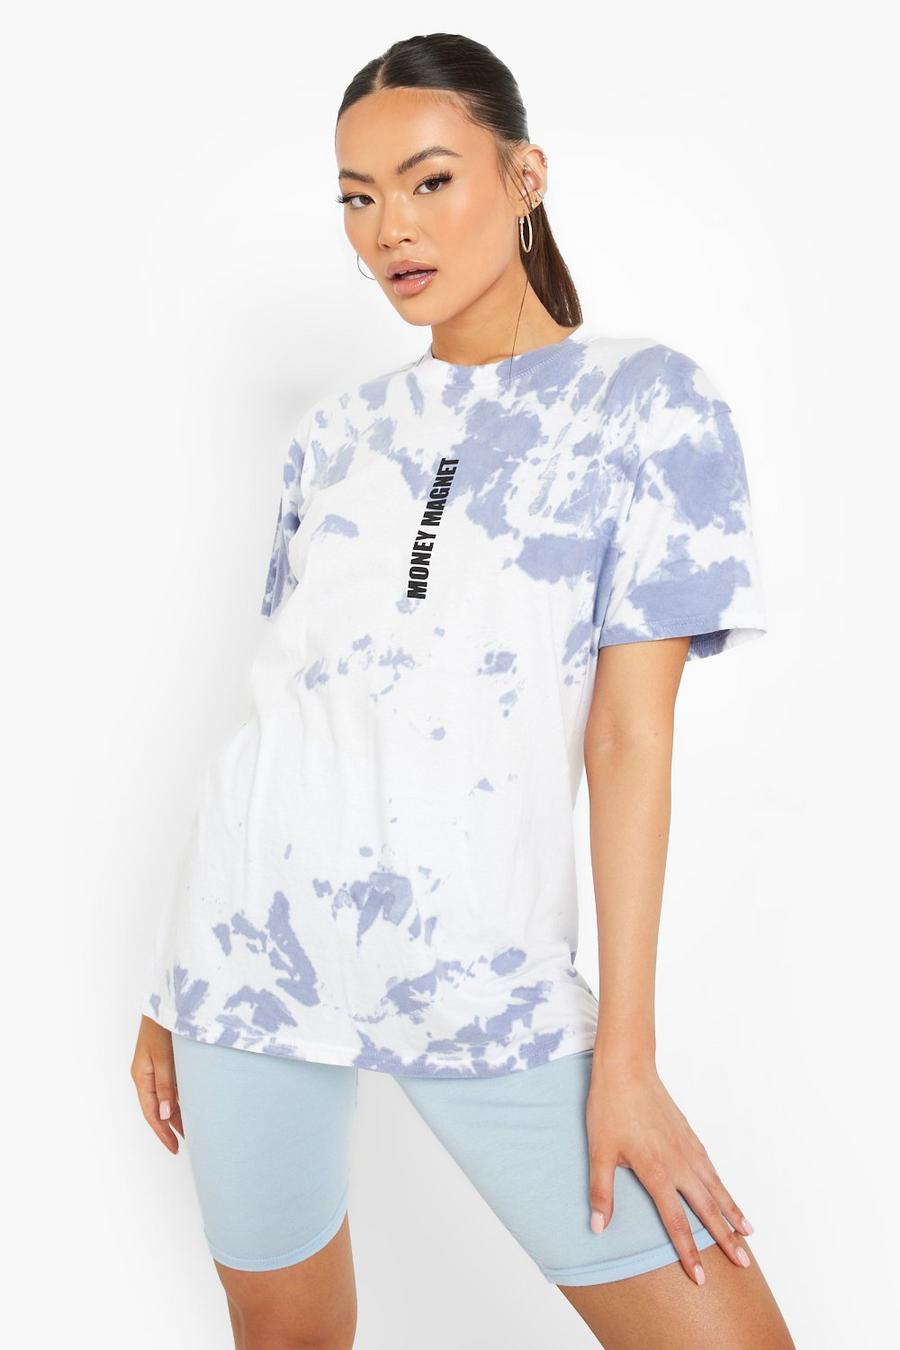 Blue Tie Dye Graphic T-Shirt image number 1